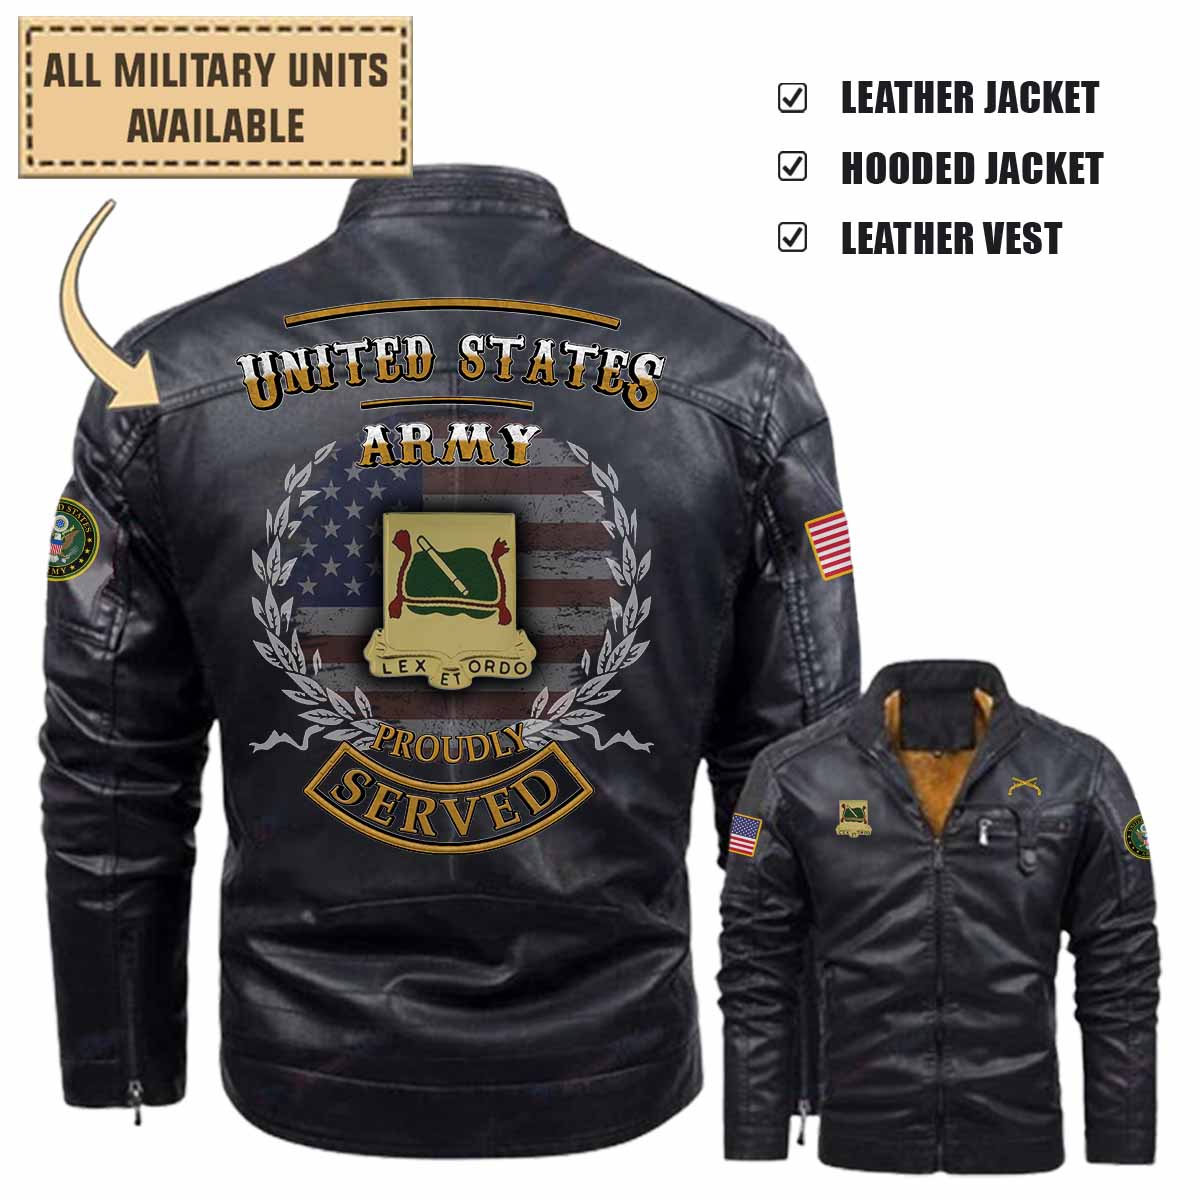 716th MP BN 716th Military Police Battalion_Military Leather Jacket and Vest